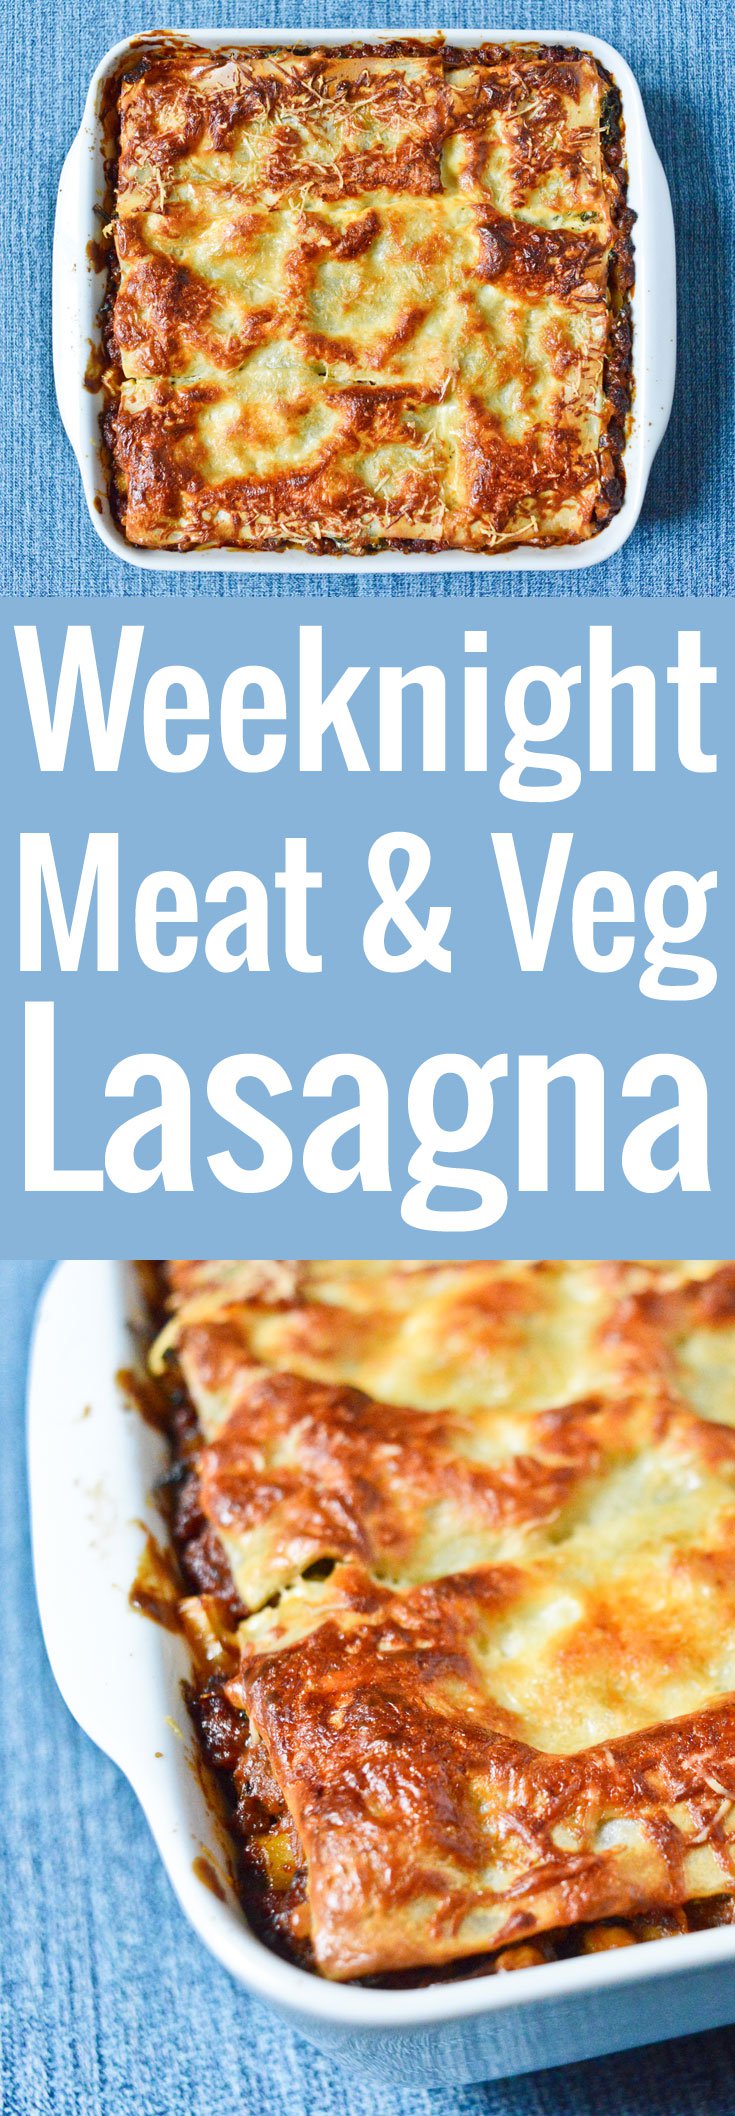 Weeknight Lasagna with Meat and Vegetables Recipe | Chocolate & Zucchini